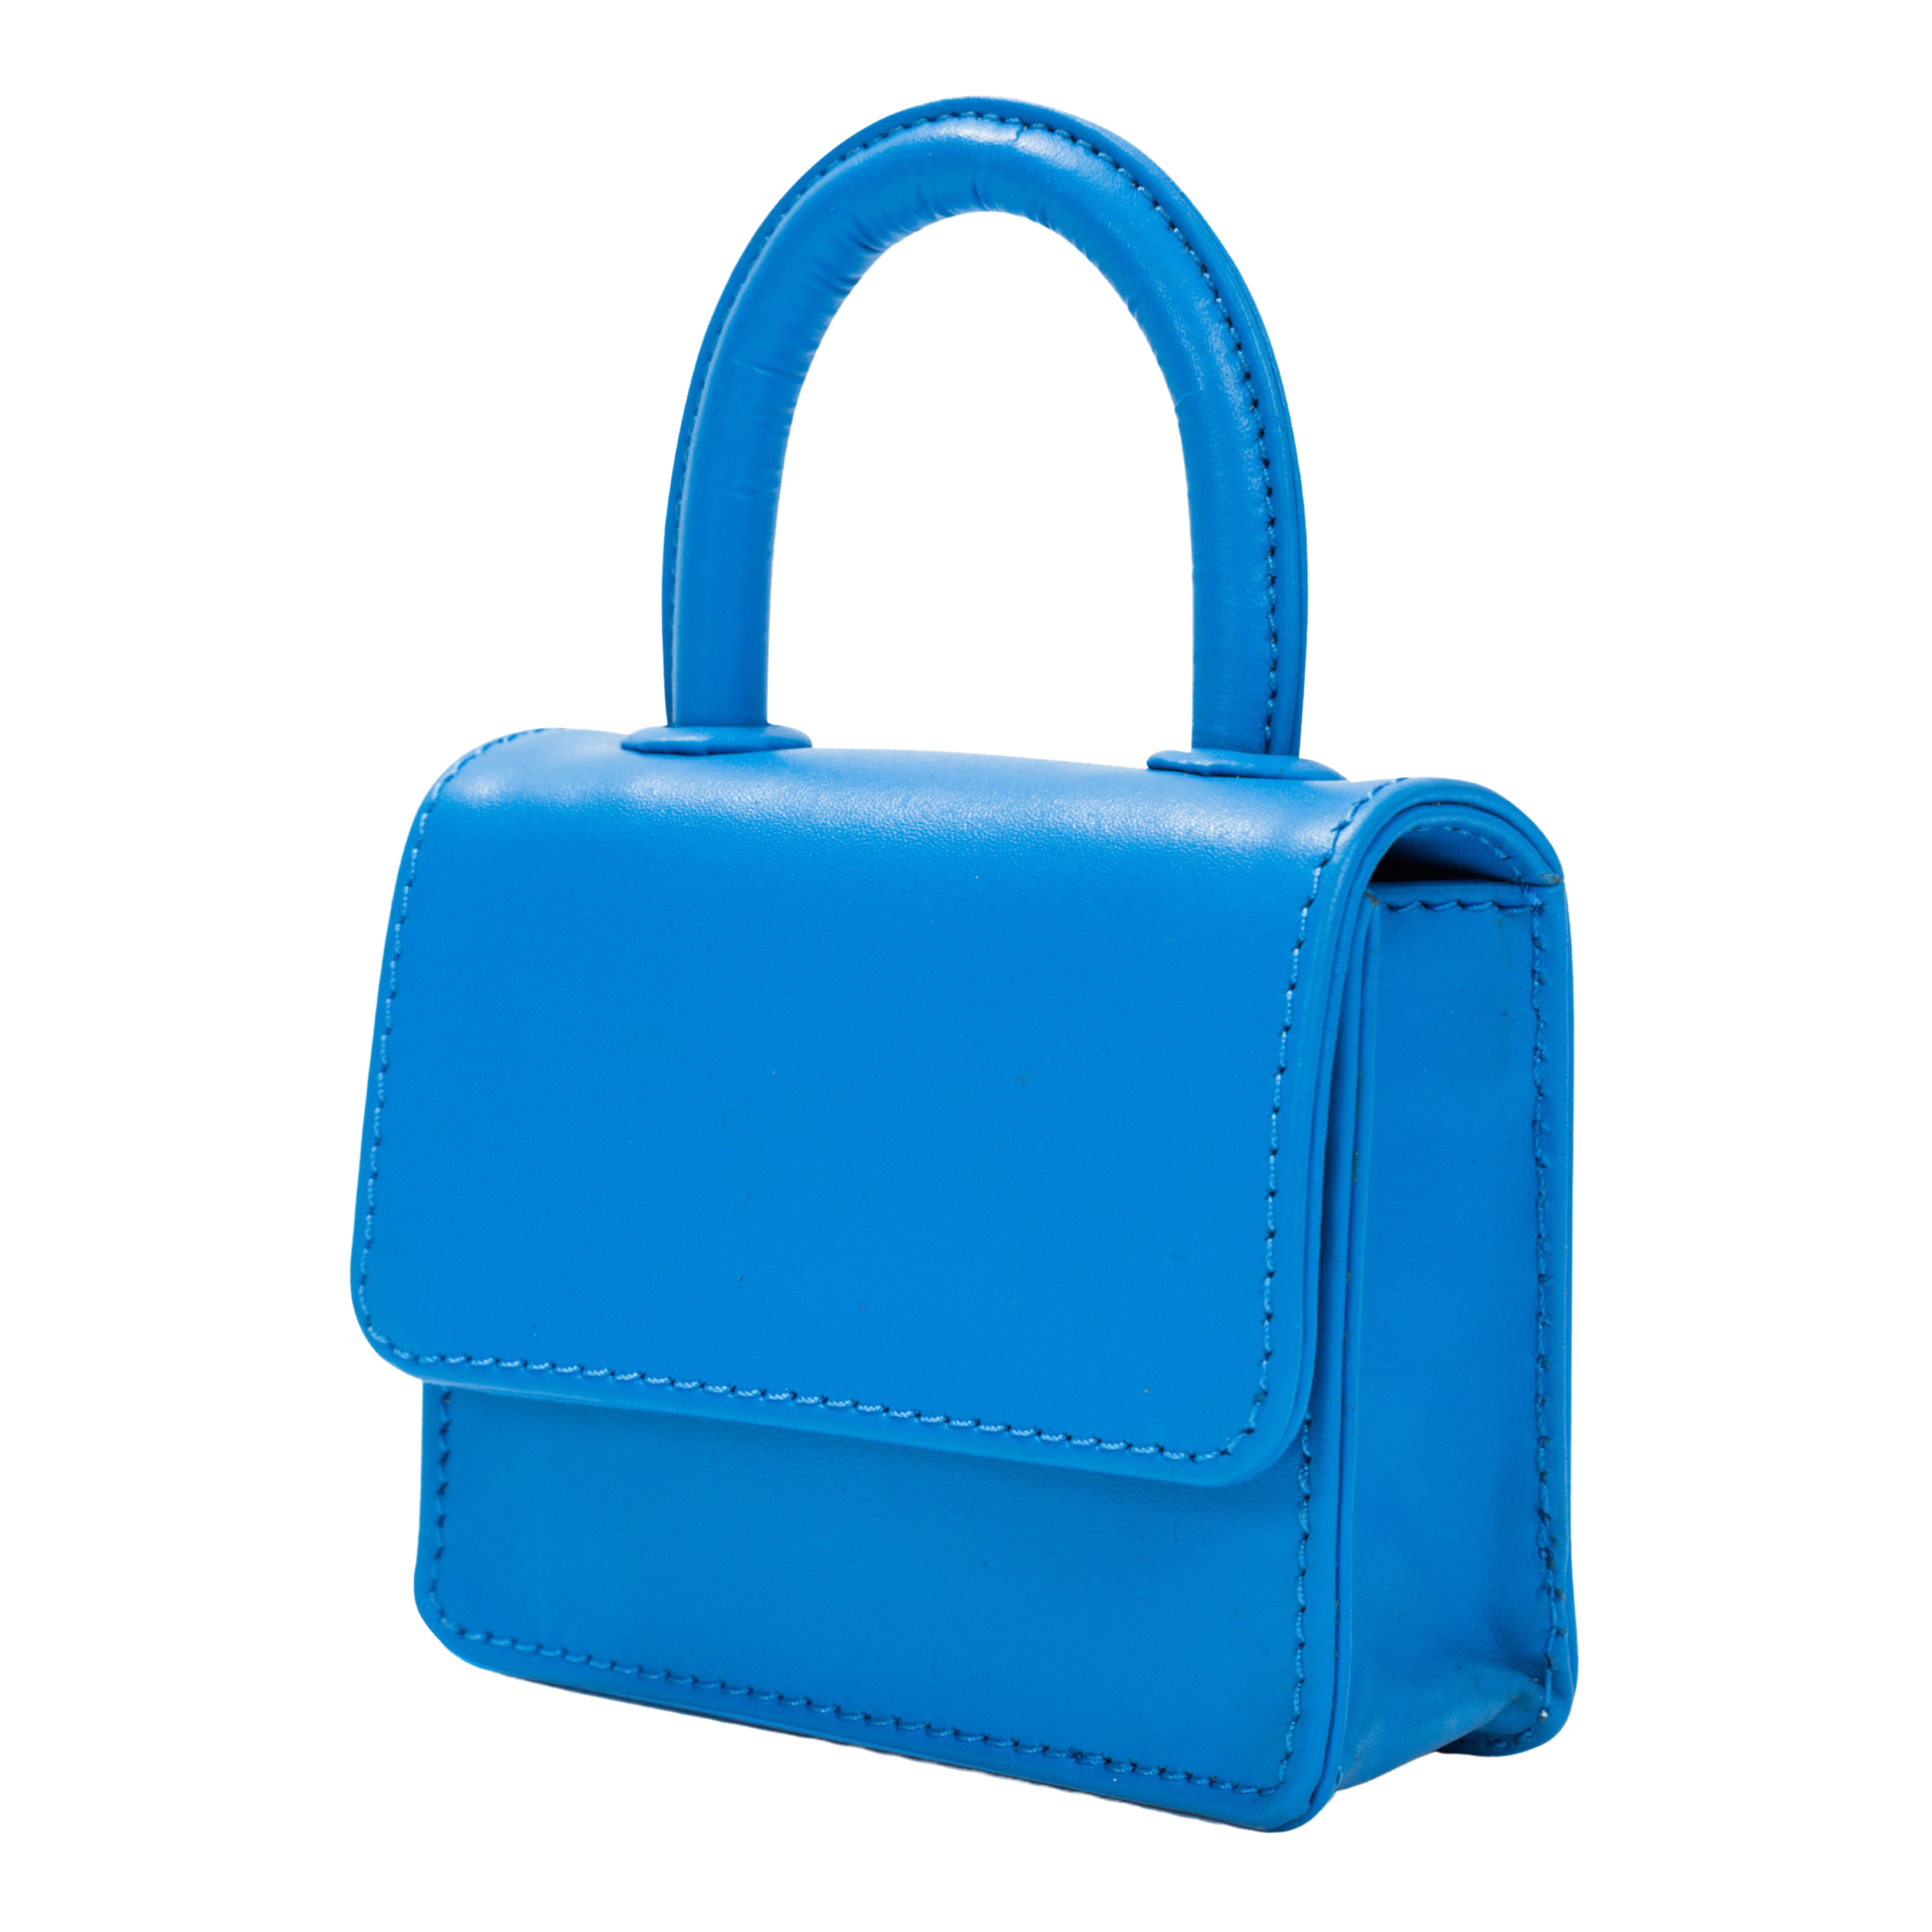 ITSY BITSY MICRO MINI BLUE LEATHER TOP HANDLE BAG